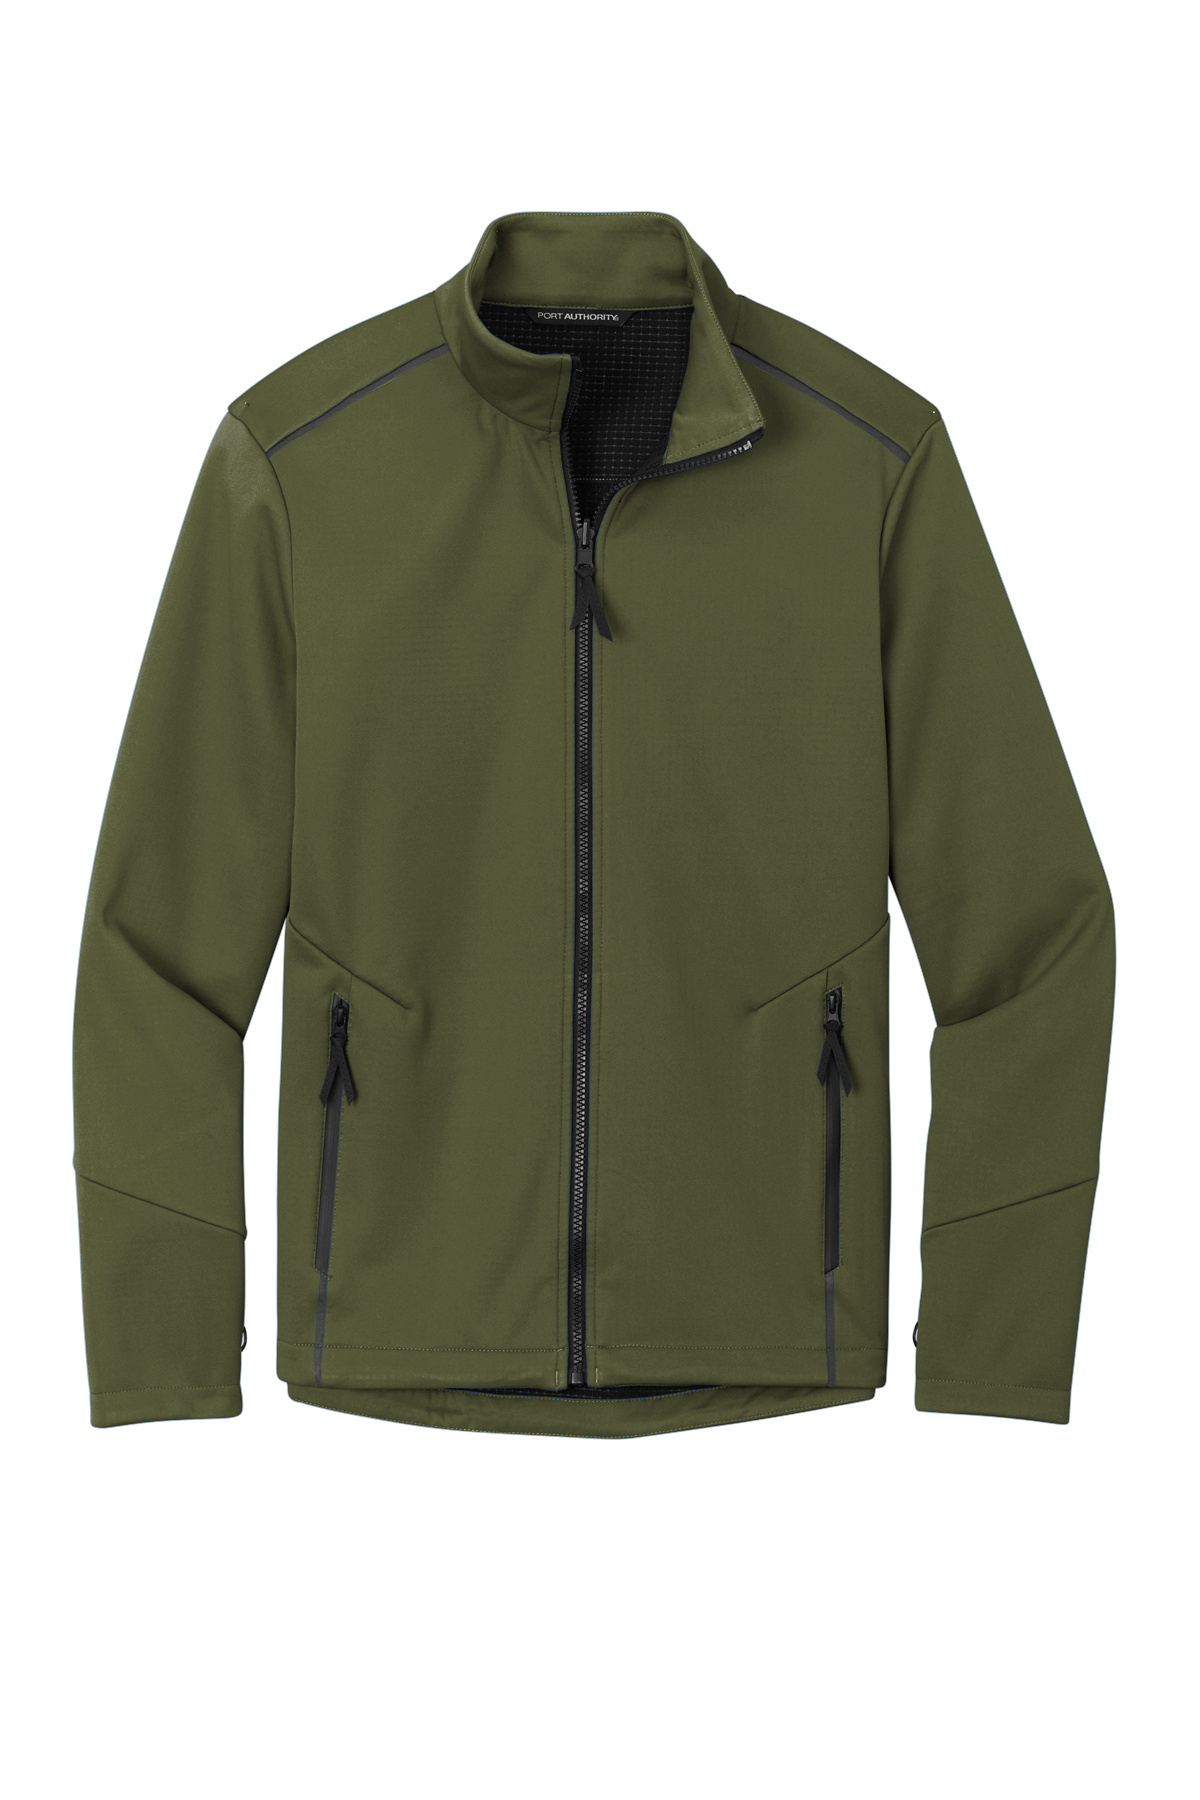 Port Authority Collective Tech Soft Shell Jacket | Product | Port Authority